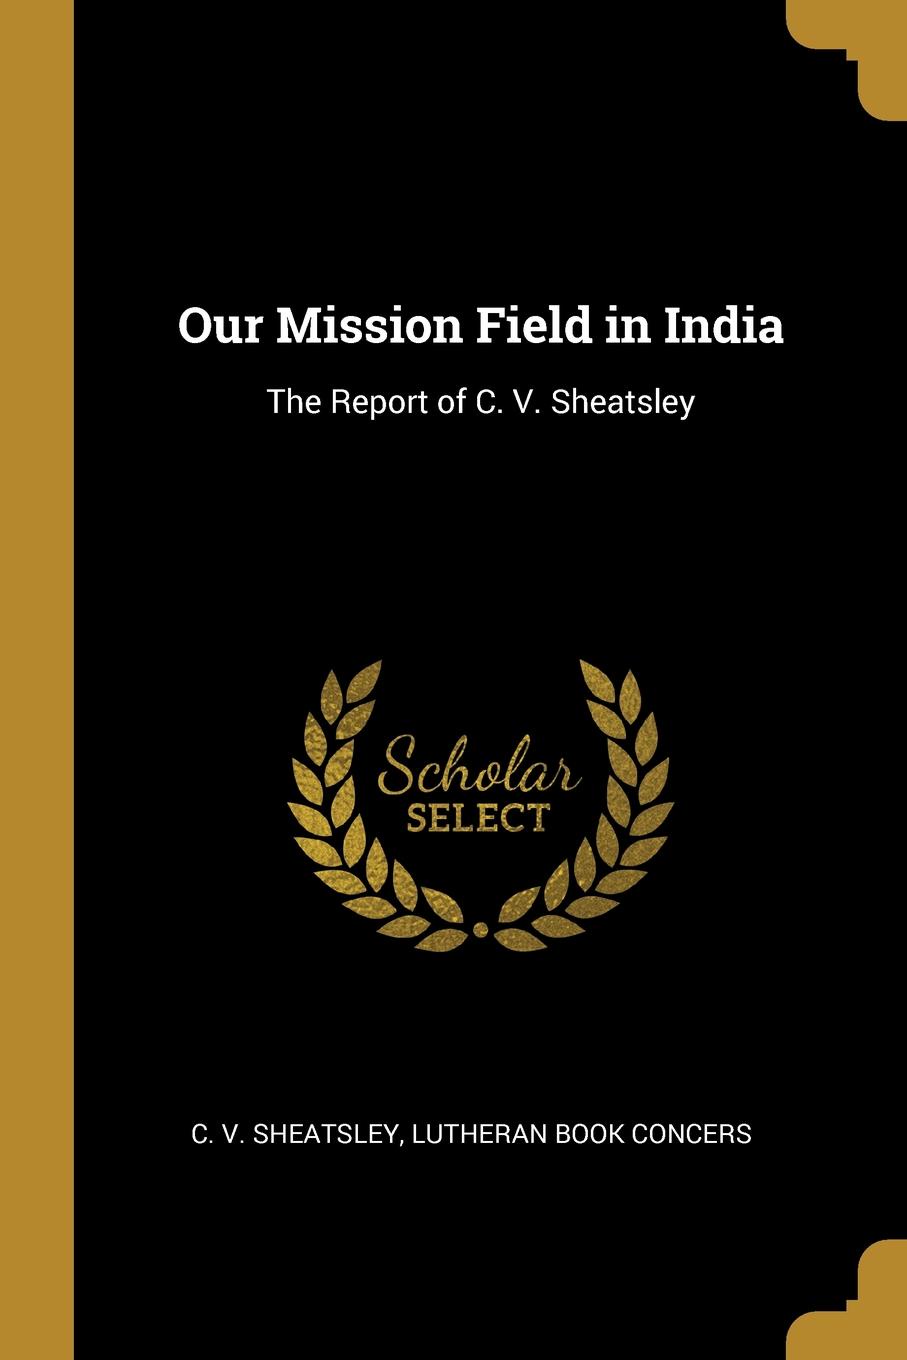 Our Mission Field in India. The Report of C. V. Sheatsley